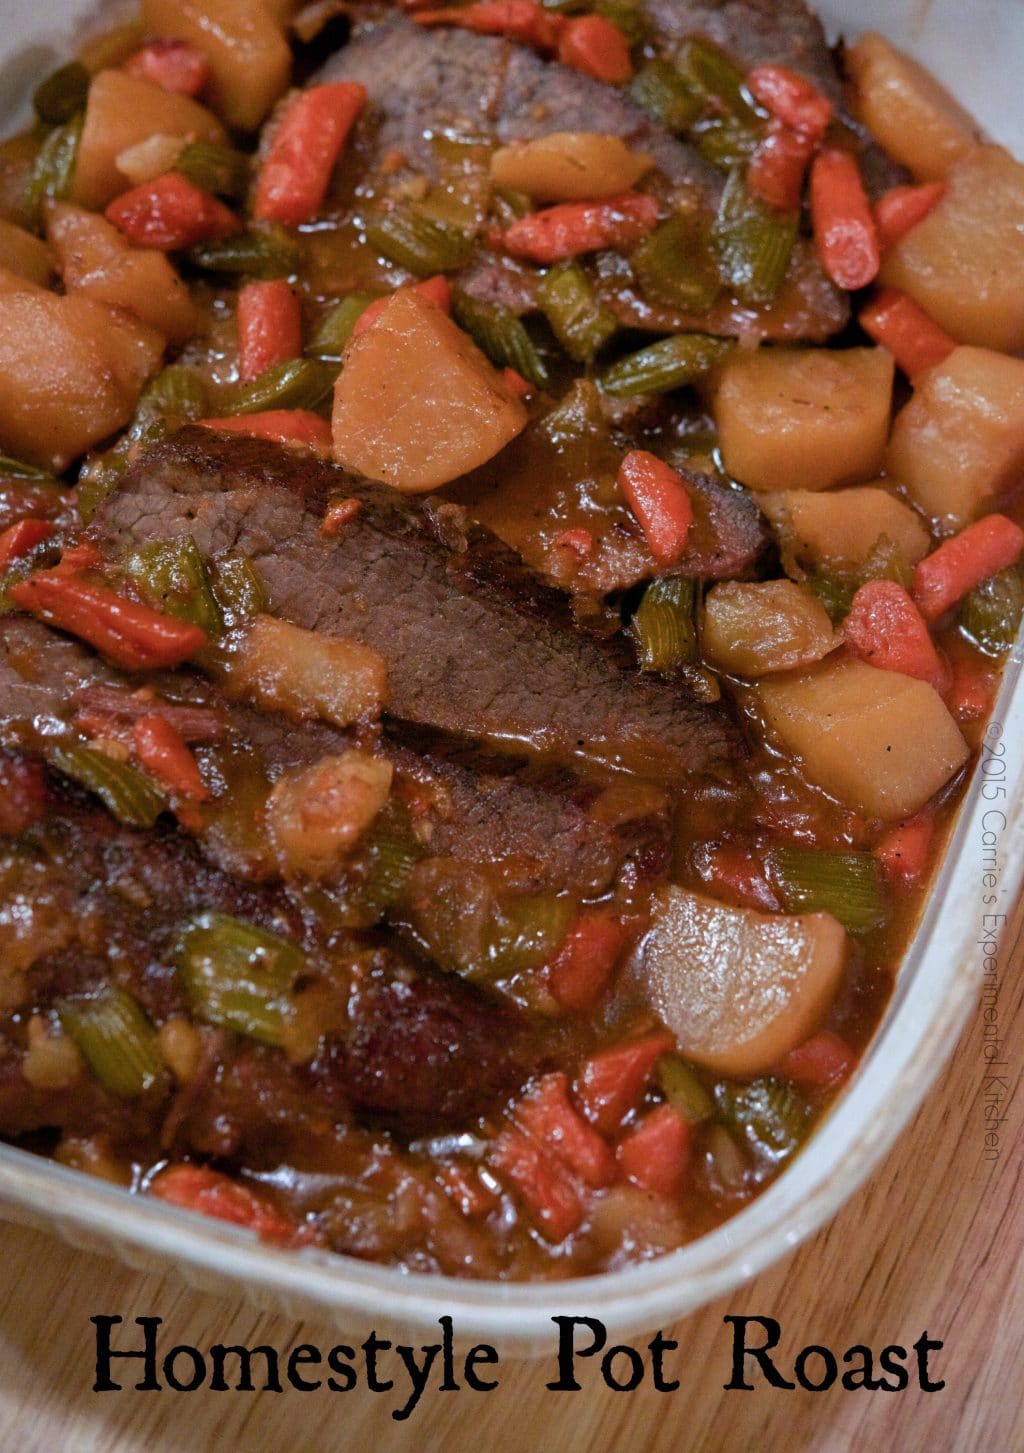 Homestyle Pot Roast | Carrie's Experimental Kitchen